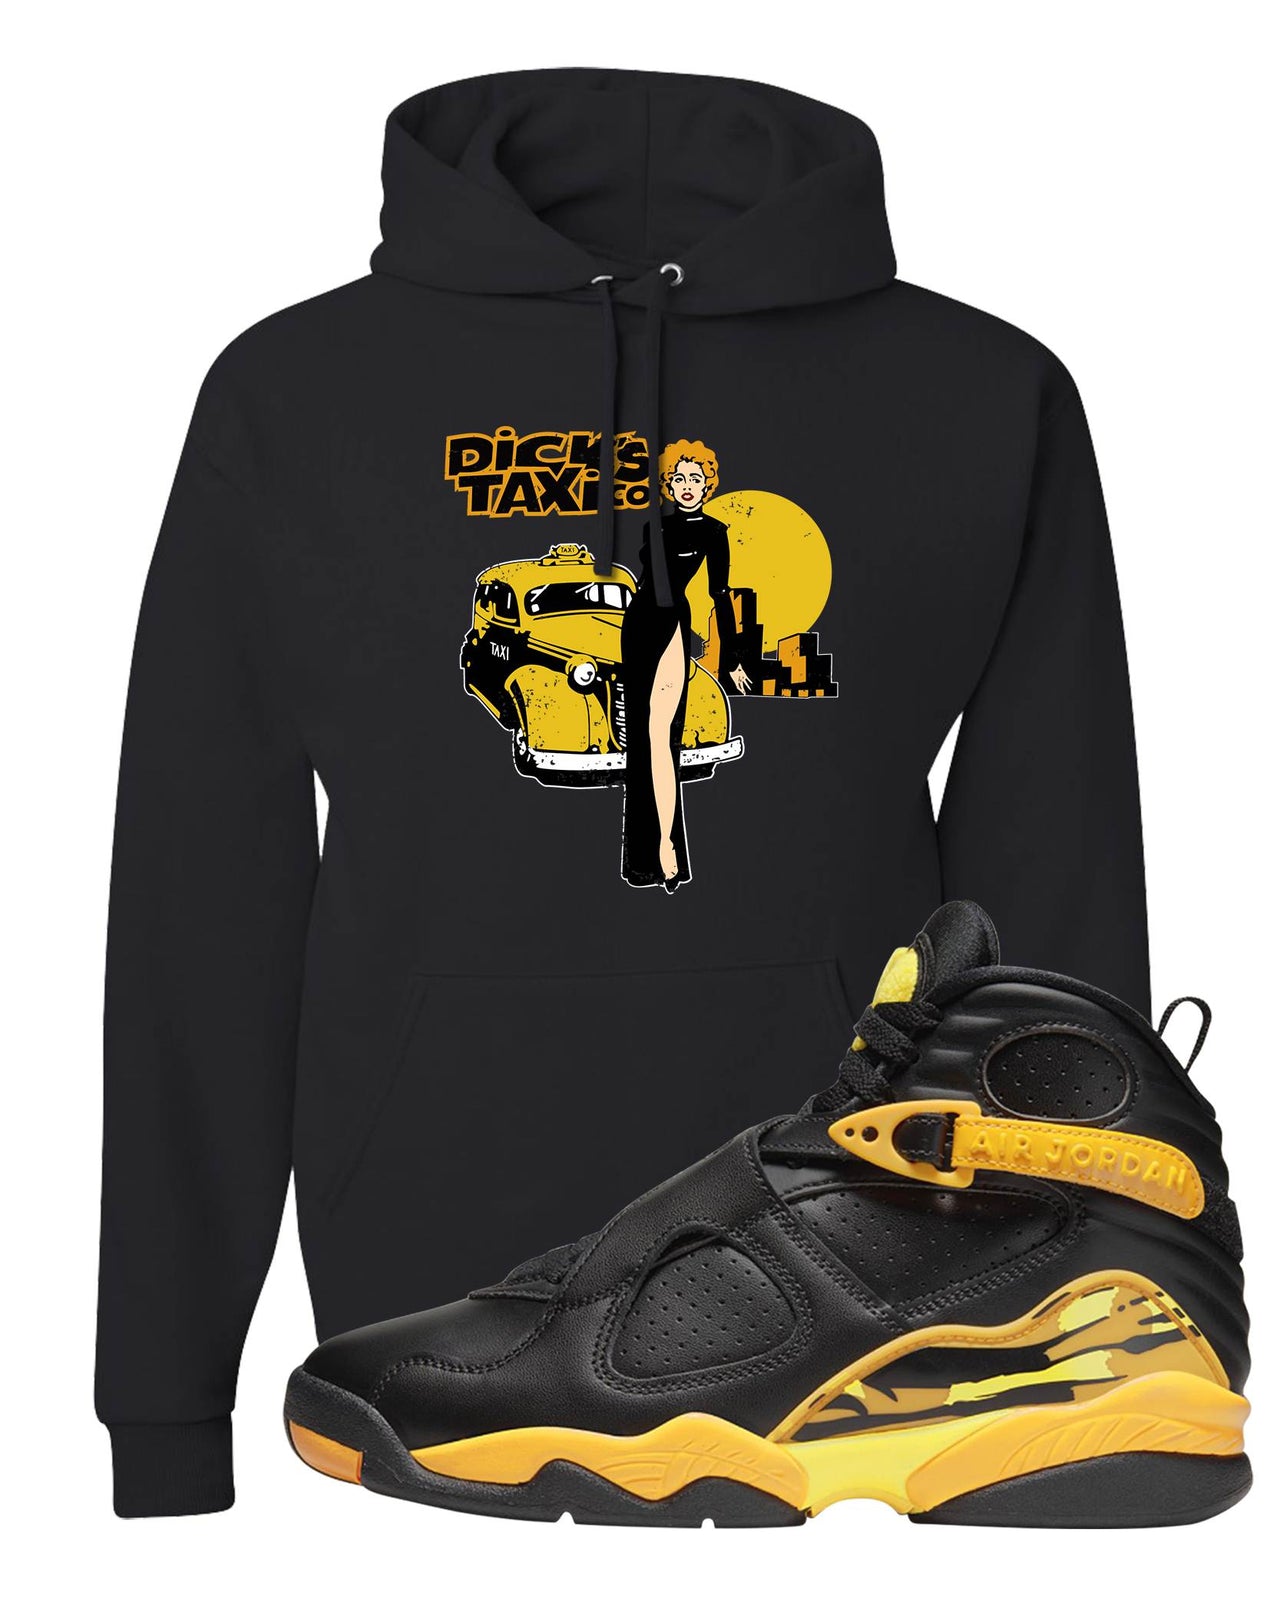 Taxi 8s Hoodie | Dick's Taxi Co., Black